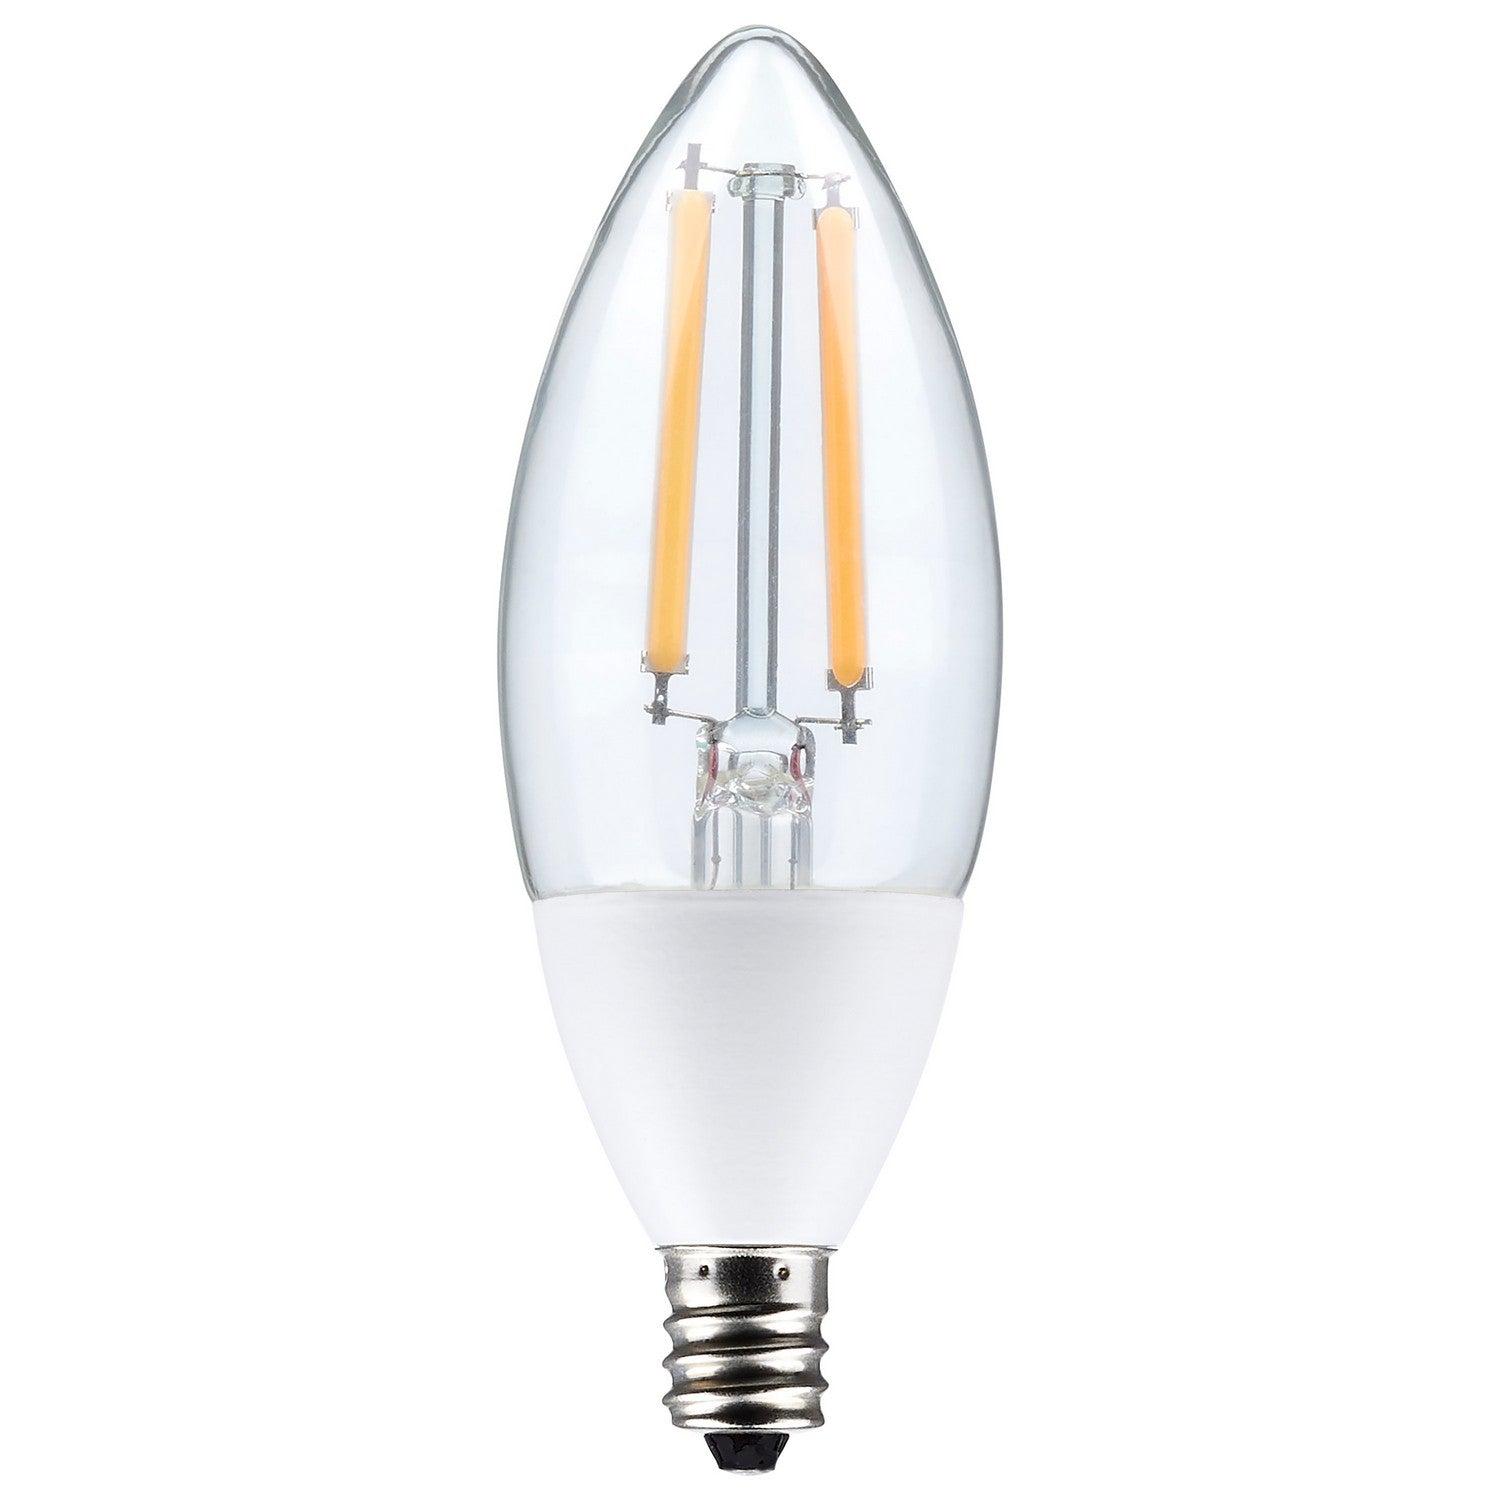 Light Bulb by Satco in White Finish (S11478)